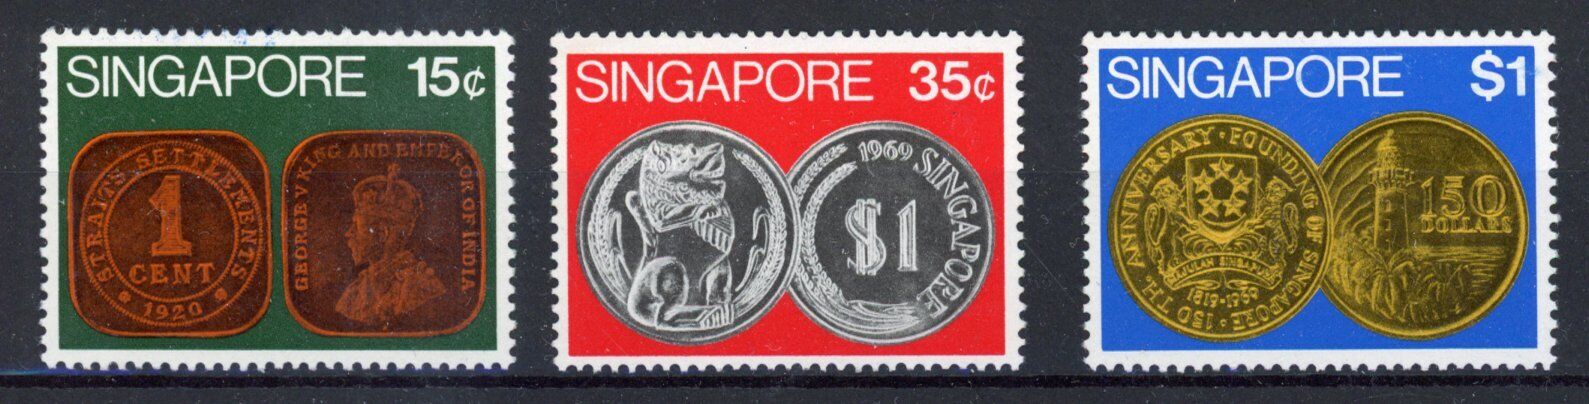 [88.516] Singapore 1969 Coins Good Set Very Fine Mnh Stamps